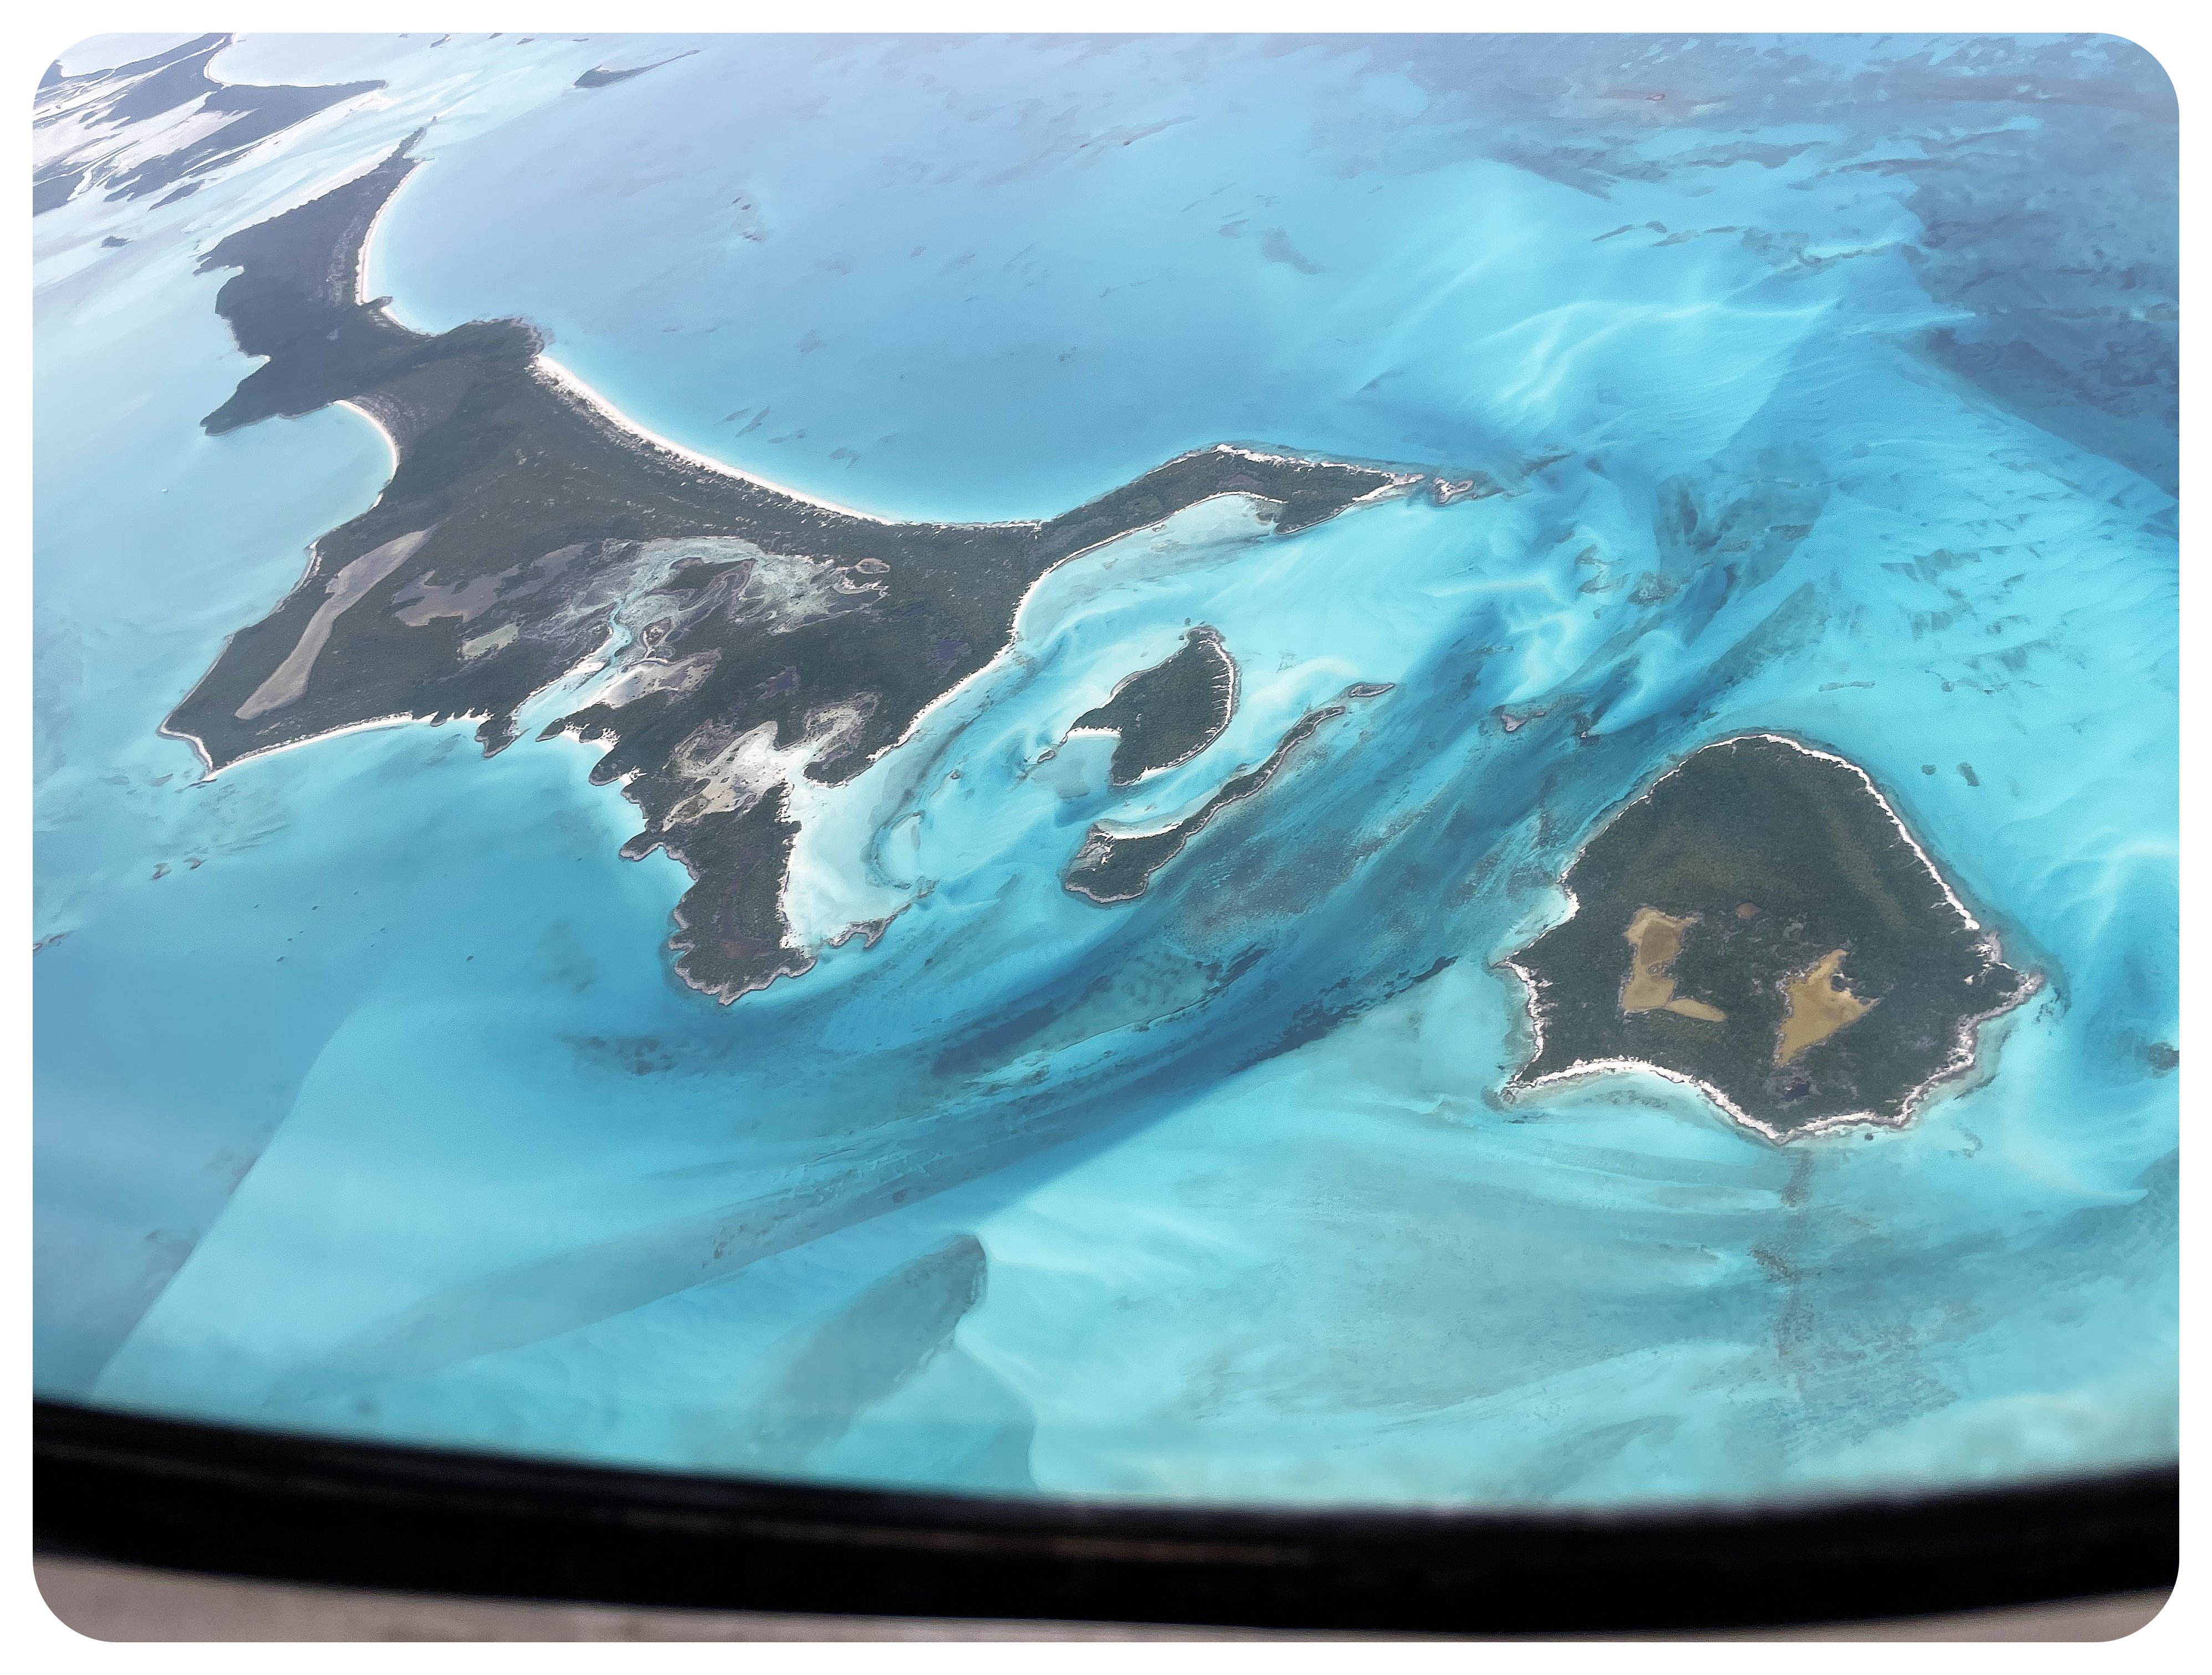 exumas from the plane